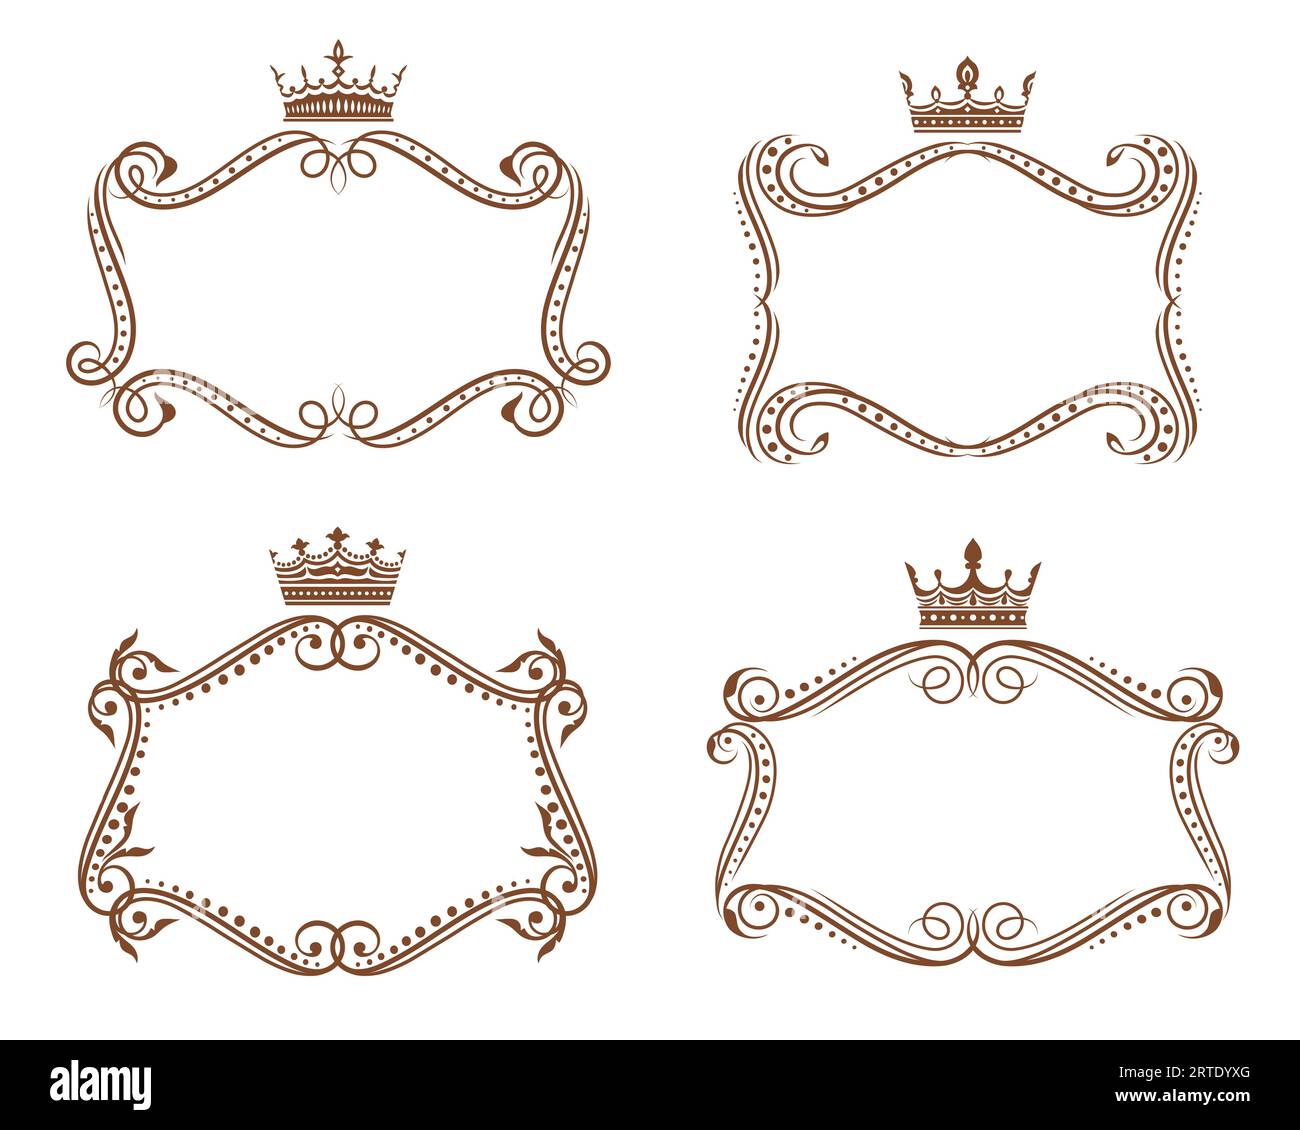 Royal heraldic frames and borders with crowns and floral elements, vector heraldry. Vintage vignettes of brown victorian flourishes, leaf scrolls and vine swirls, topped by crowns with fleur-de-lis Stock Vector